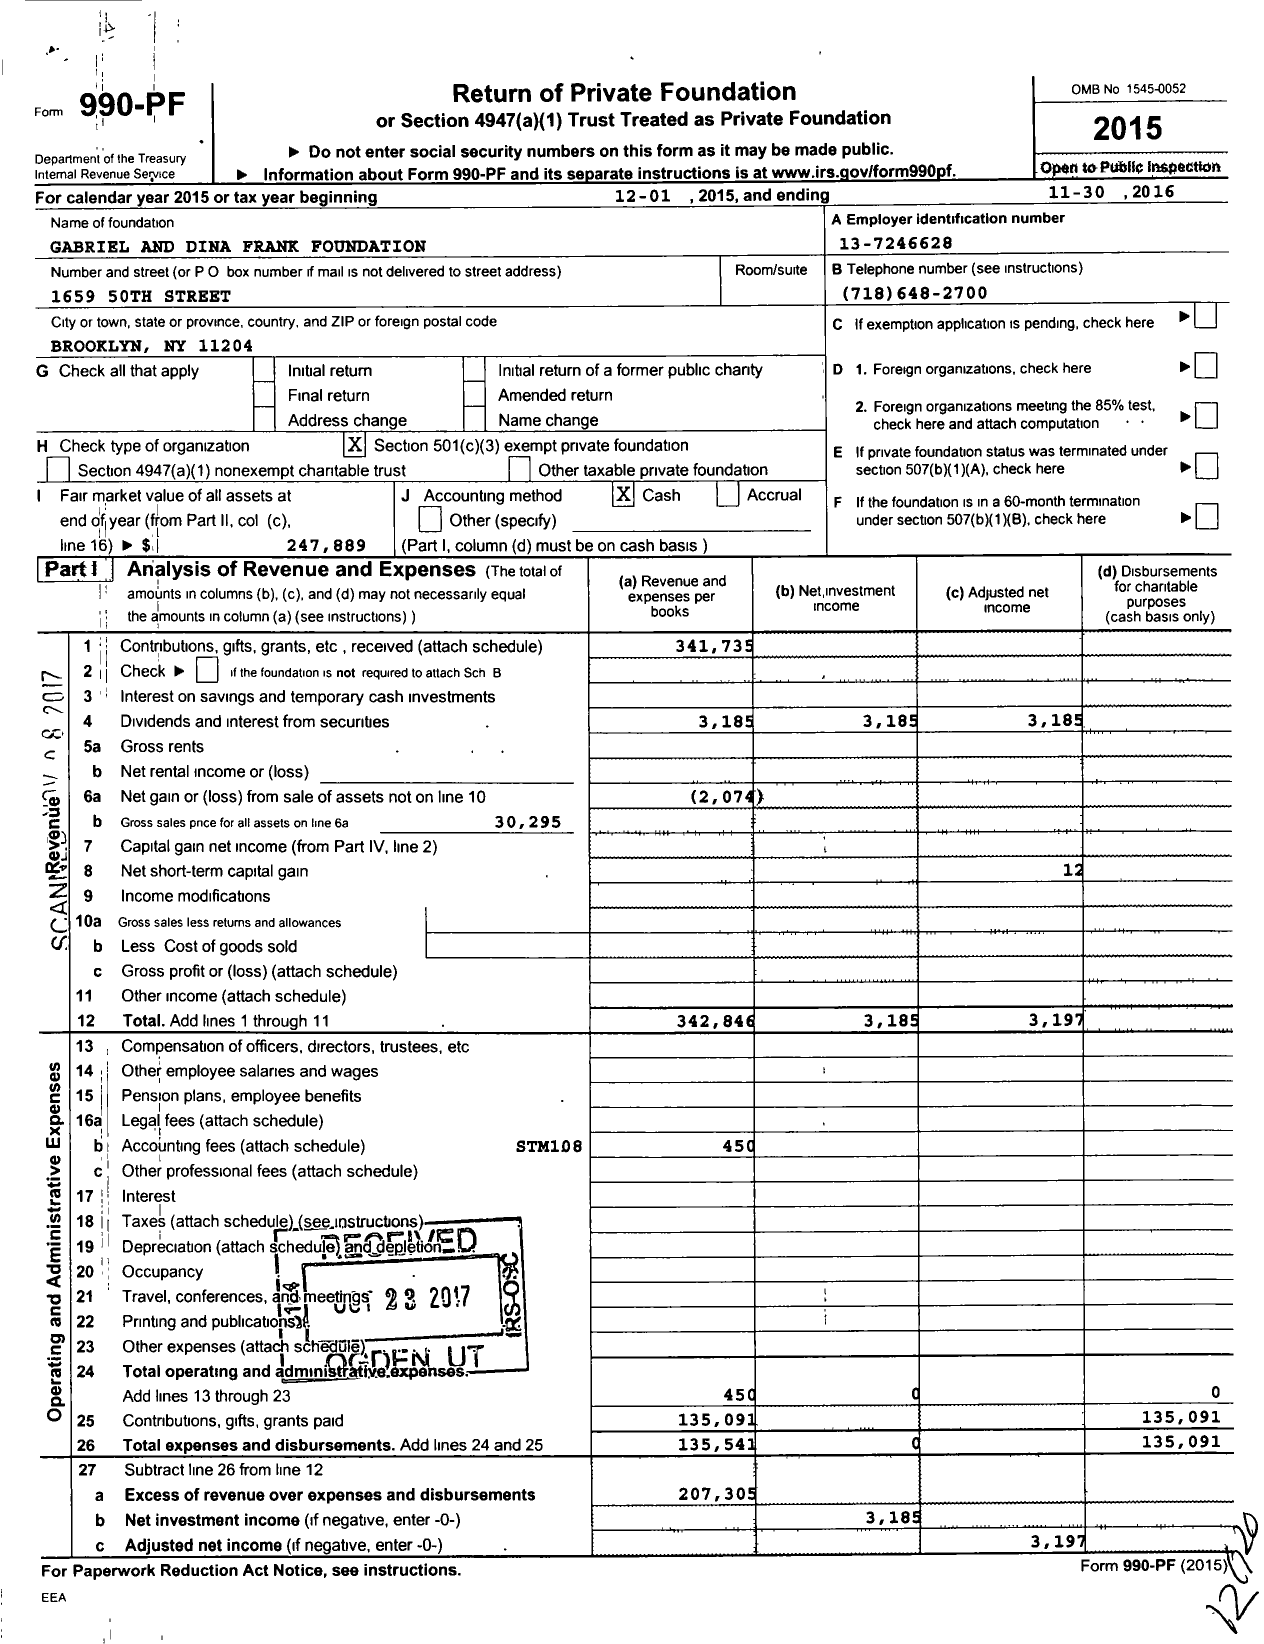 Image of first page of 2015 Form 990PF for Gabriel and Dina Frank Foundation